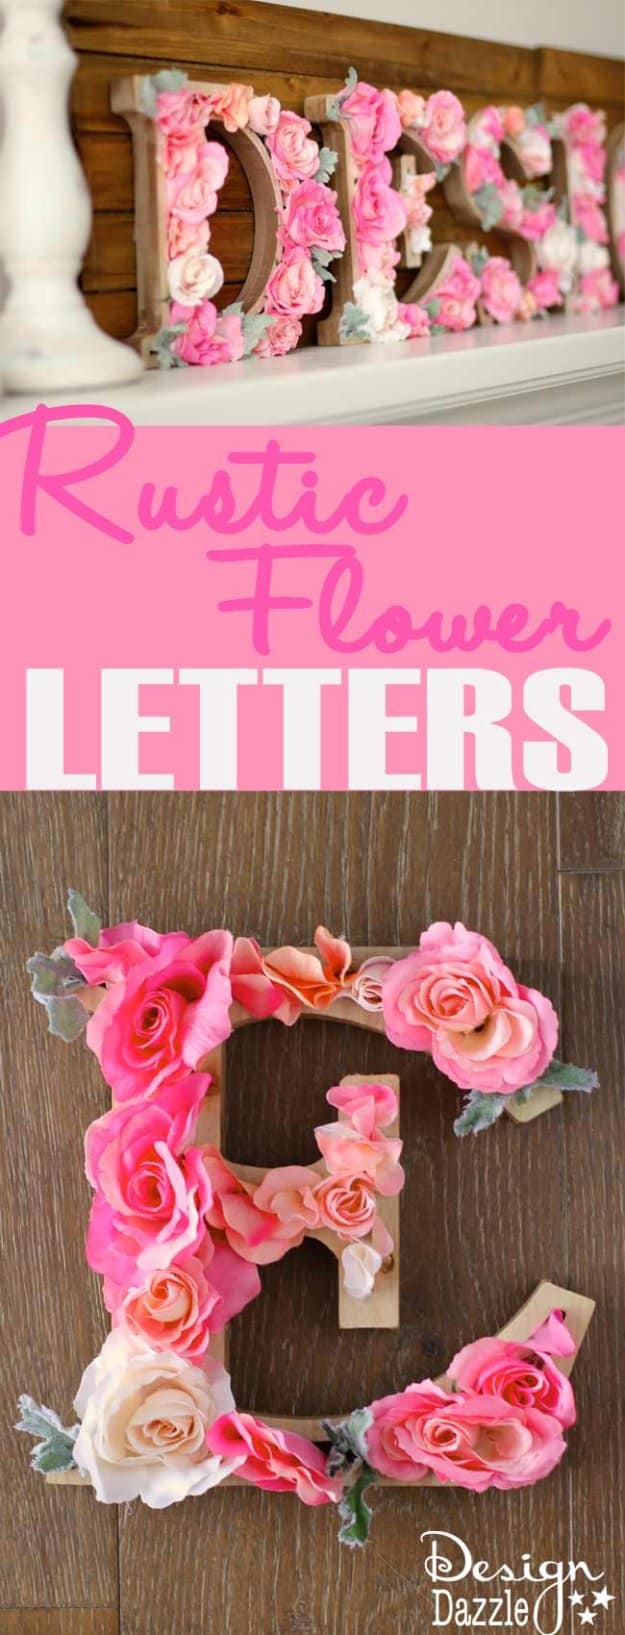 Brilliant DIY Decor Ideas for The Bedroom - DIY Rustic Letters with Flowers - Rustic and Vintage Decorating Projects for Bedroom Furniture, Bedding, Wall Art, Headboards, Rugs, Tables and Accessories. Tutorials and Step By Step Instructions 